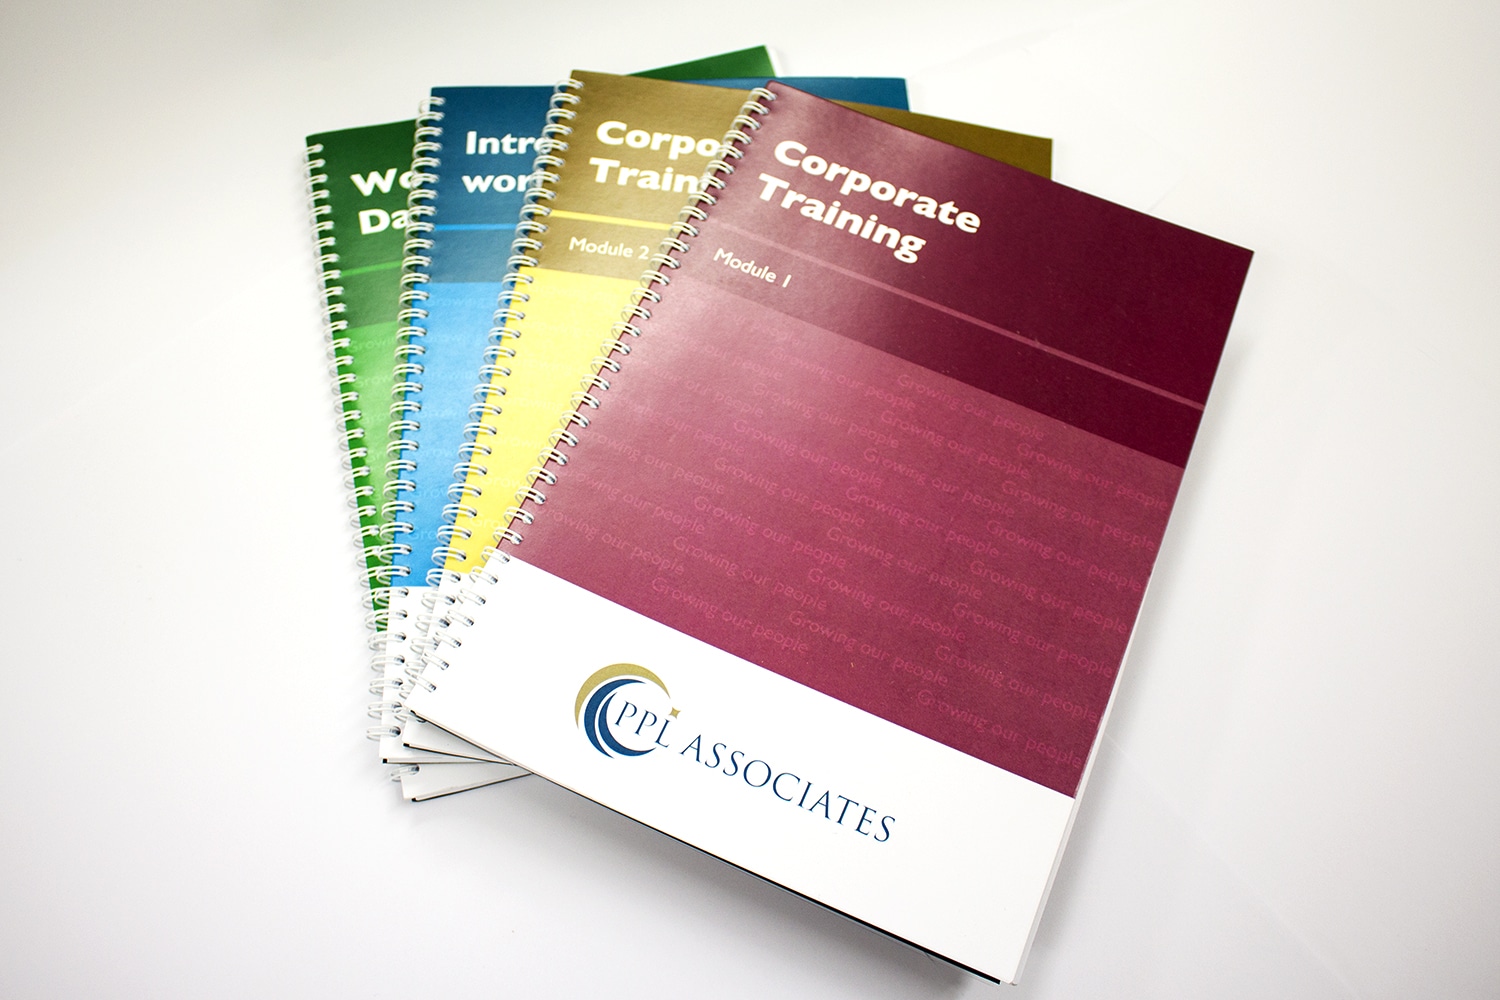 Printed Manuals, Printed Business and Training Manuals